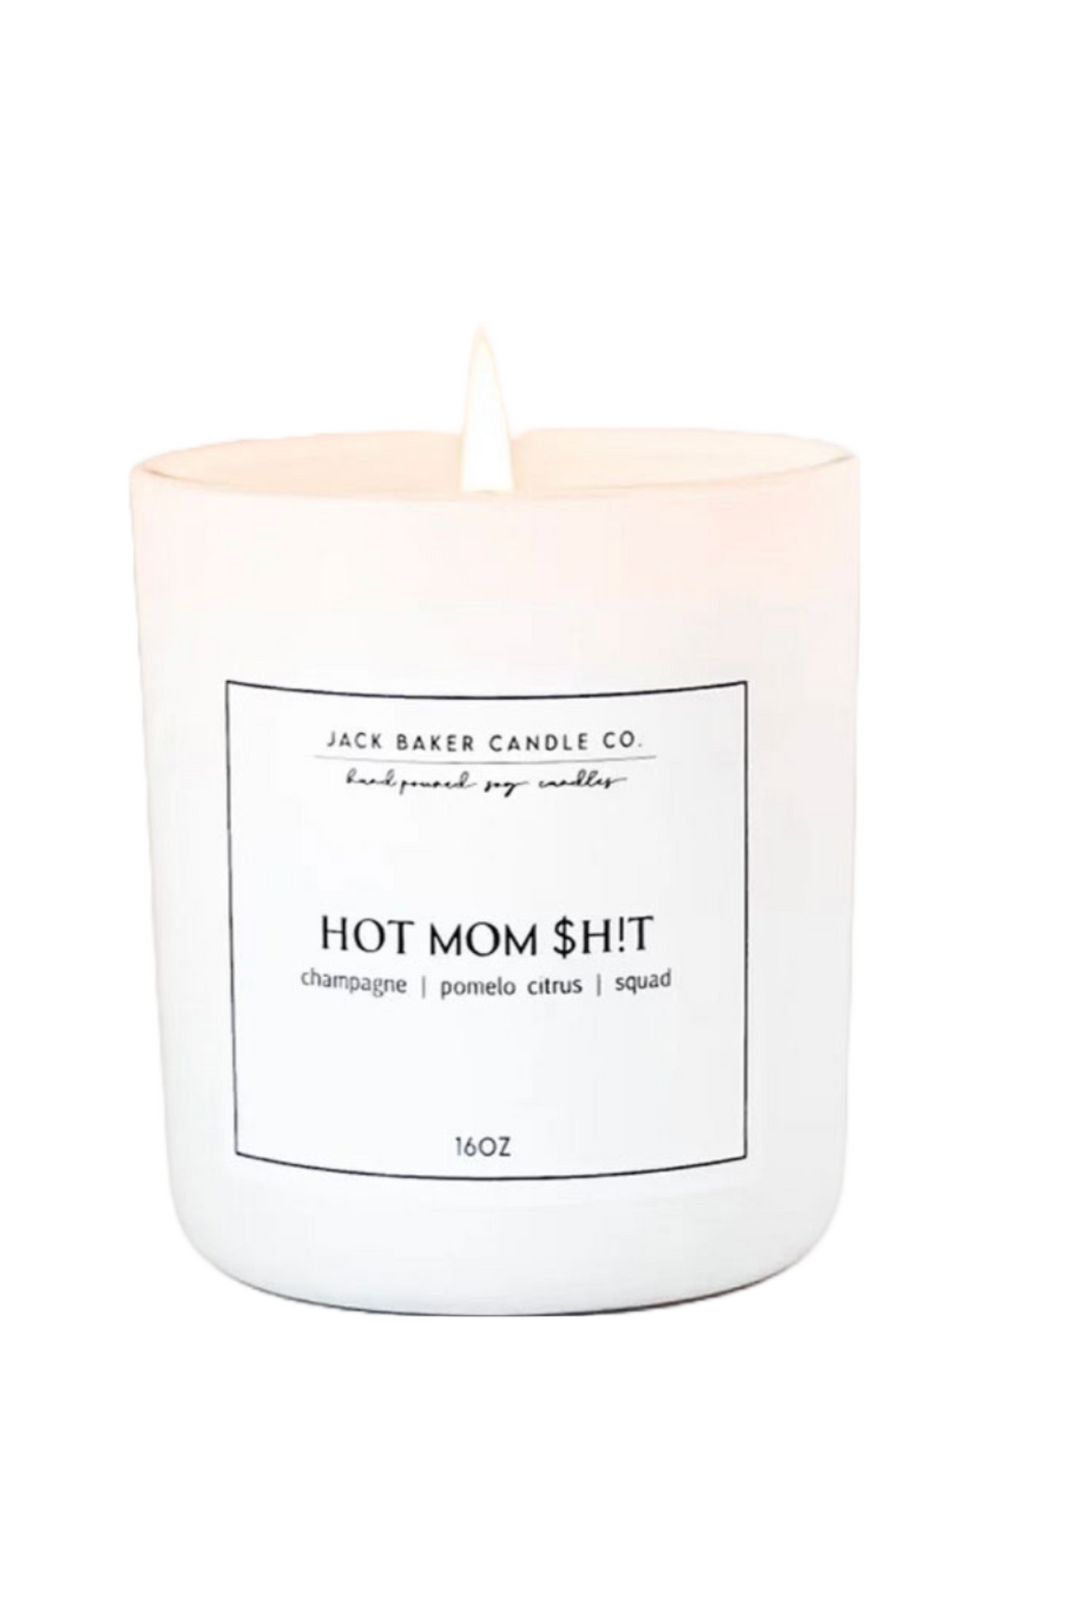 "Hot Mom $hit" Candle